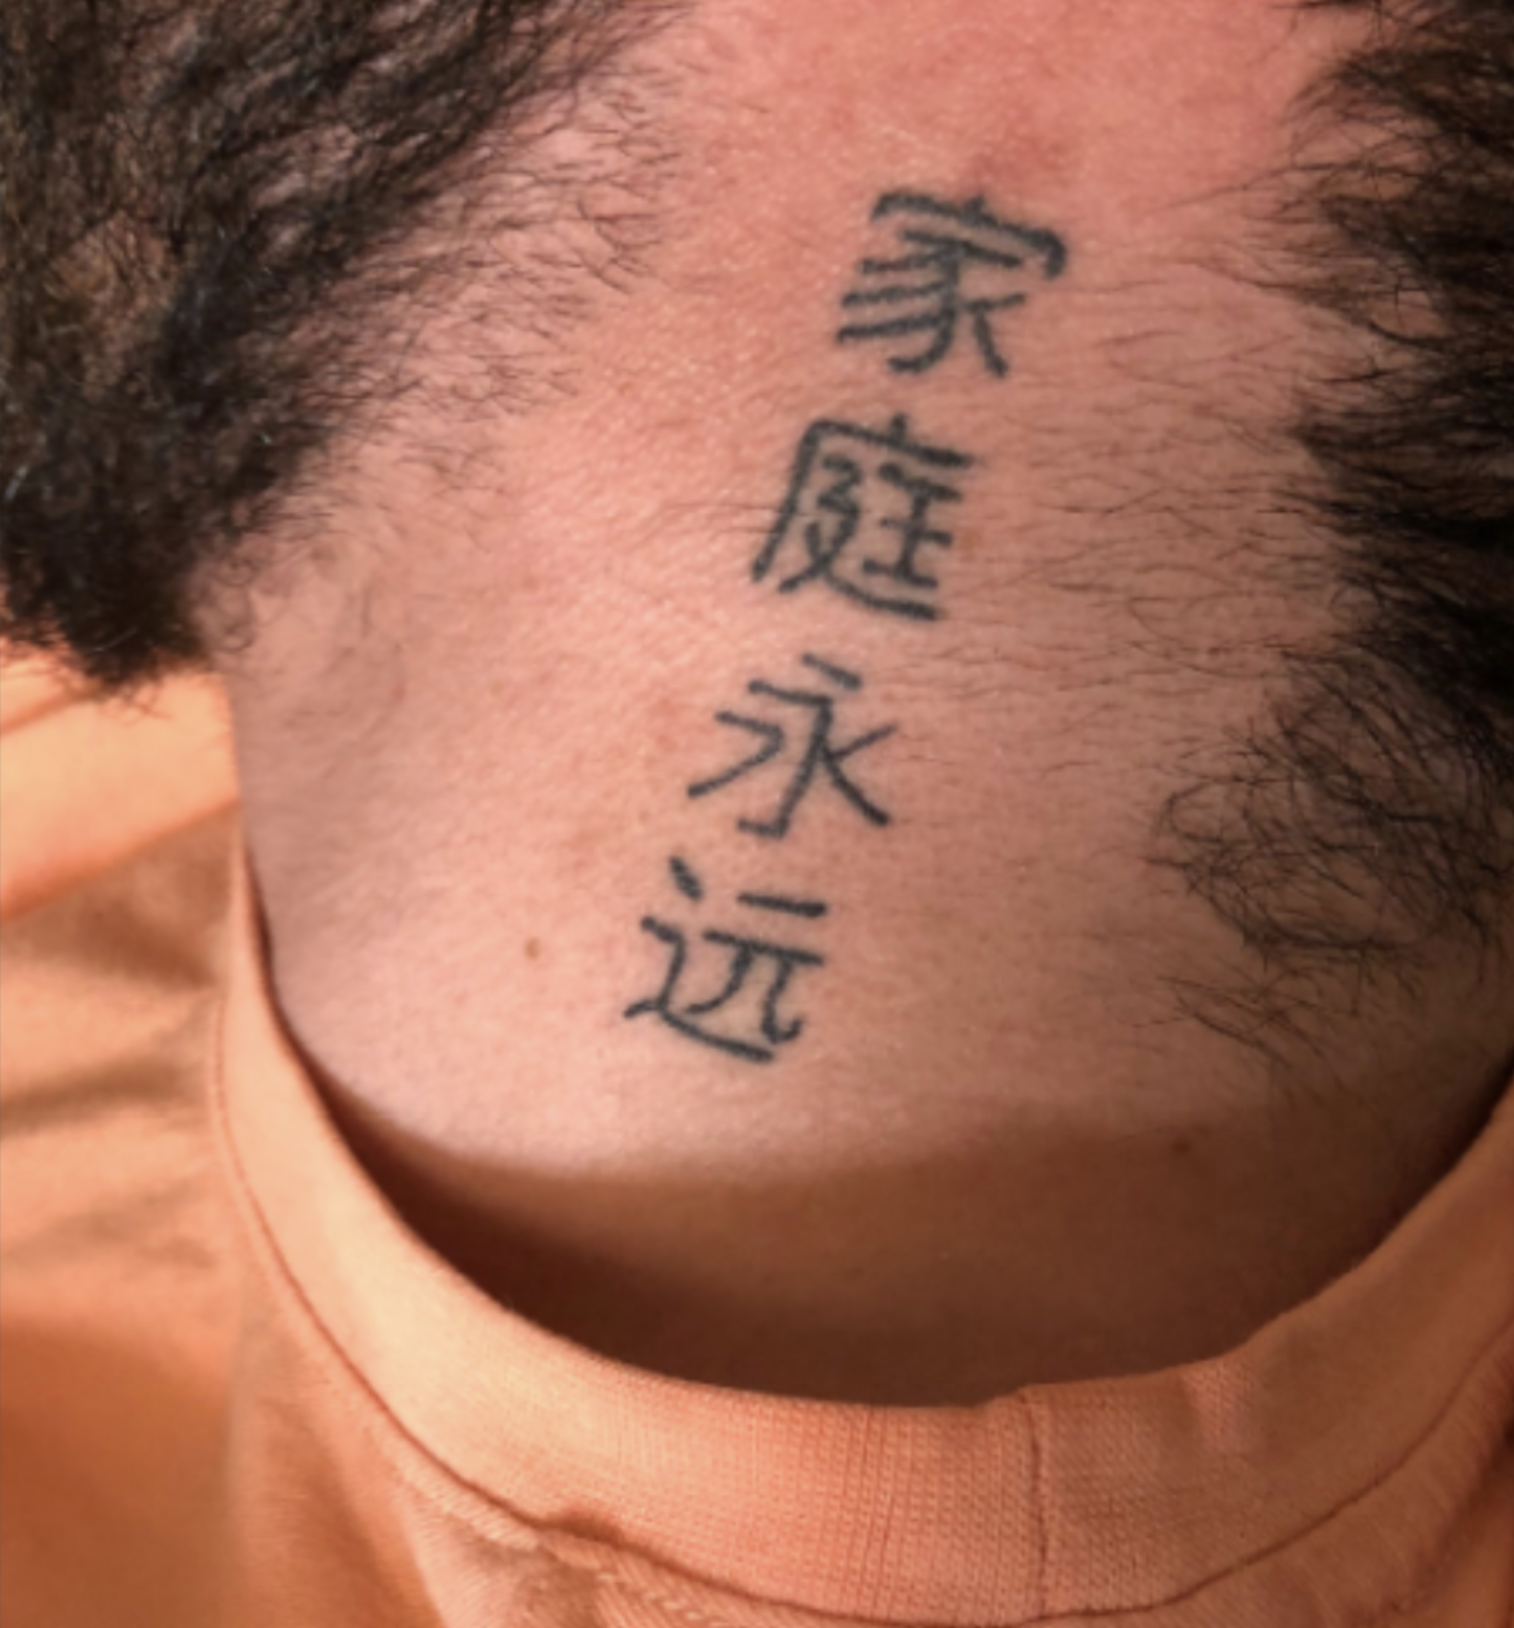 before removal of chinese word tattoo